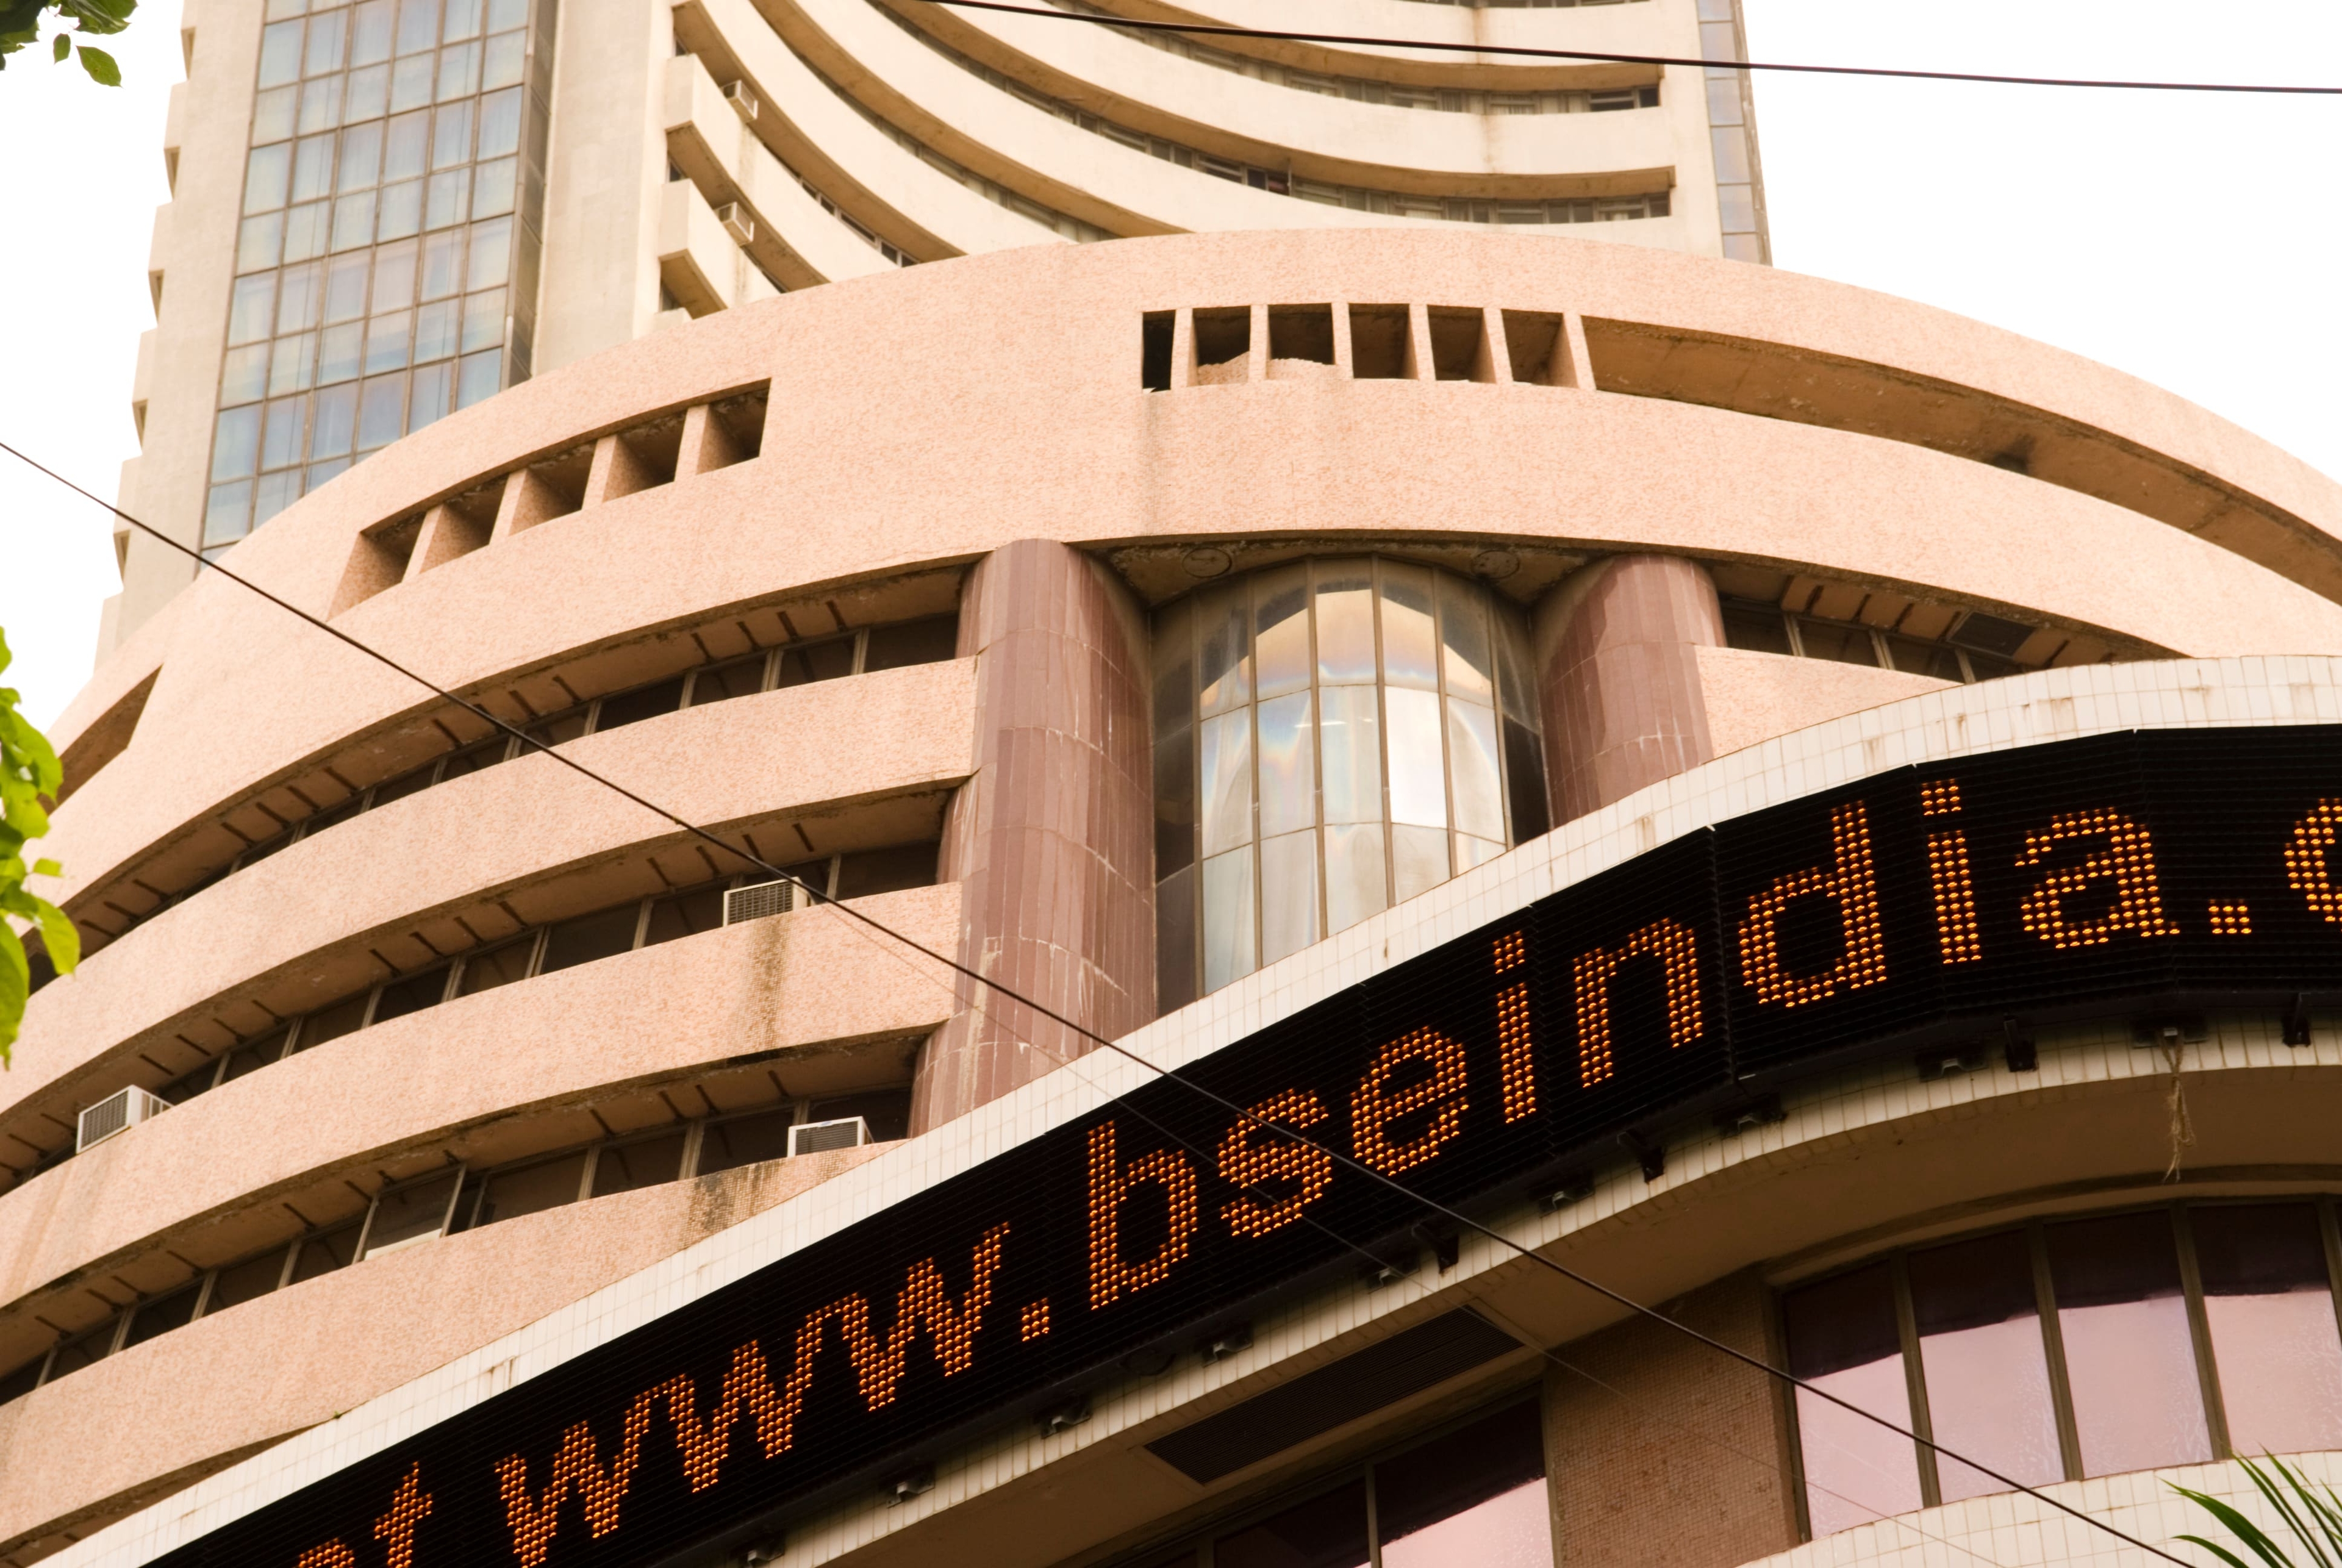 Indian markets ended with healthy gains on March 16, tracking positive global cues as hopes of an end of the ongoing Russia-Ukraine war lifted sentiment. Sensex closed with strong gains of 1,040 points, or 1.86 percent, at 56,816.65 while the Nifty settled 312 points, or 1.87 percent, higher at 16,975.35. The rally in the market was broad-based as the BSE Midcap and Smallcap indices closed 1.80 percent and 1.47 percent higher, respectively.